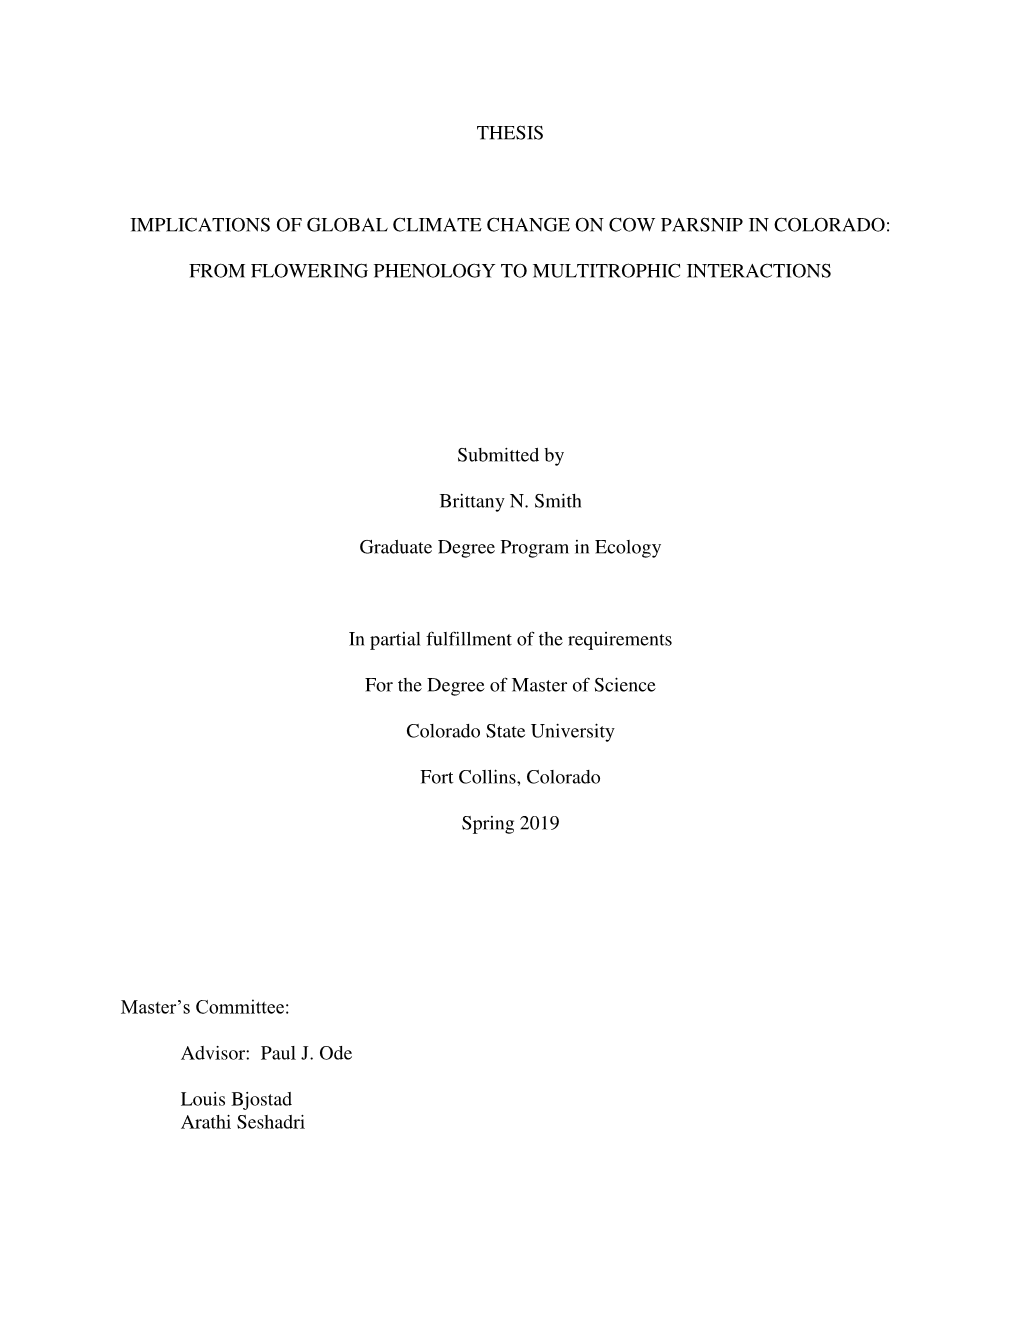 Thesis Implications of Global Climate